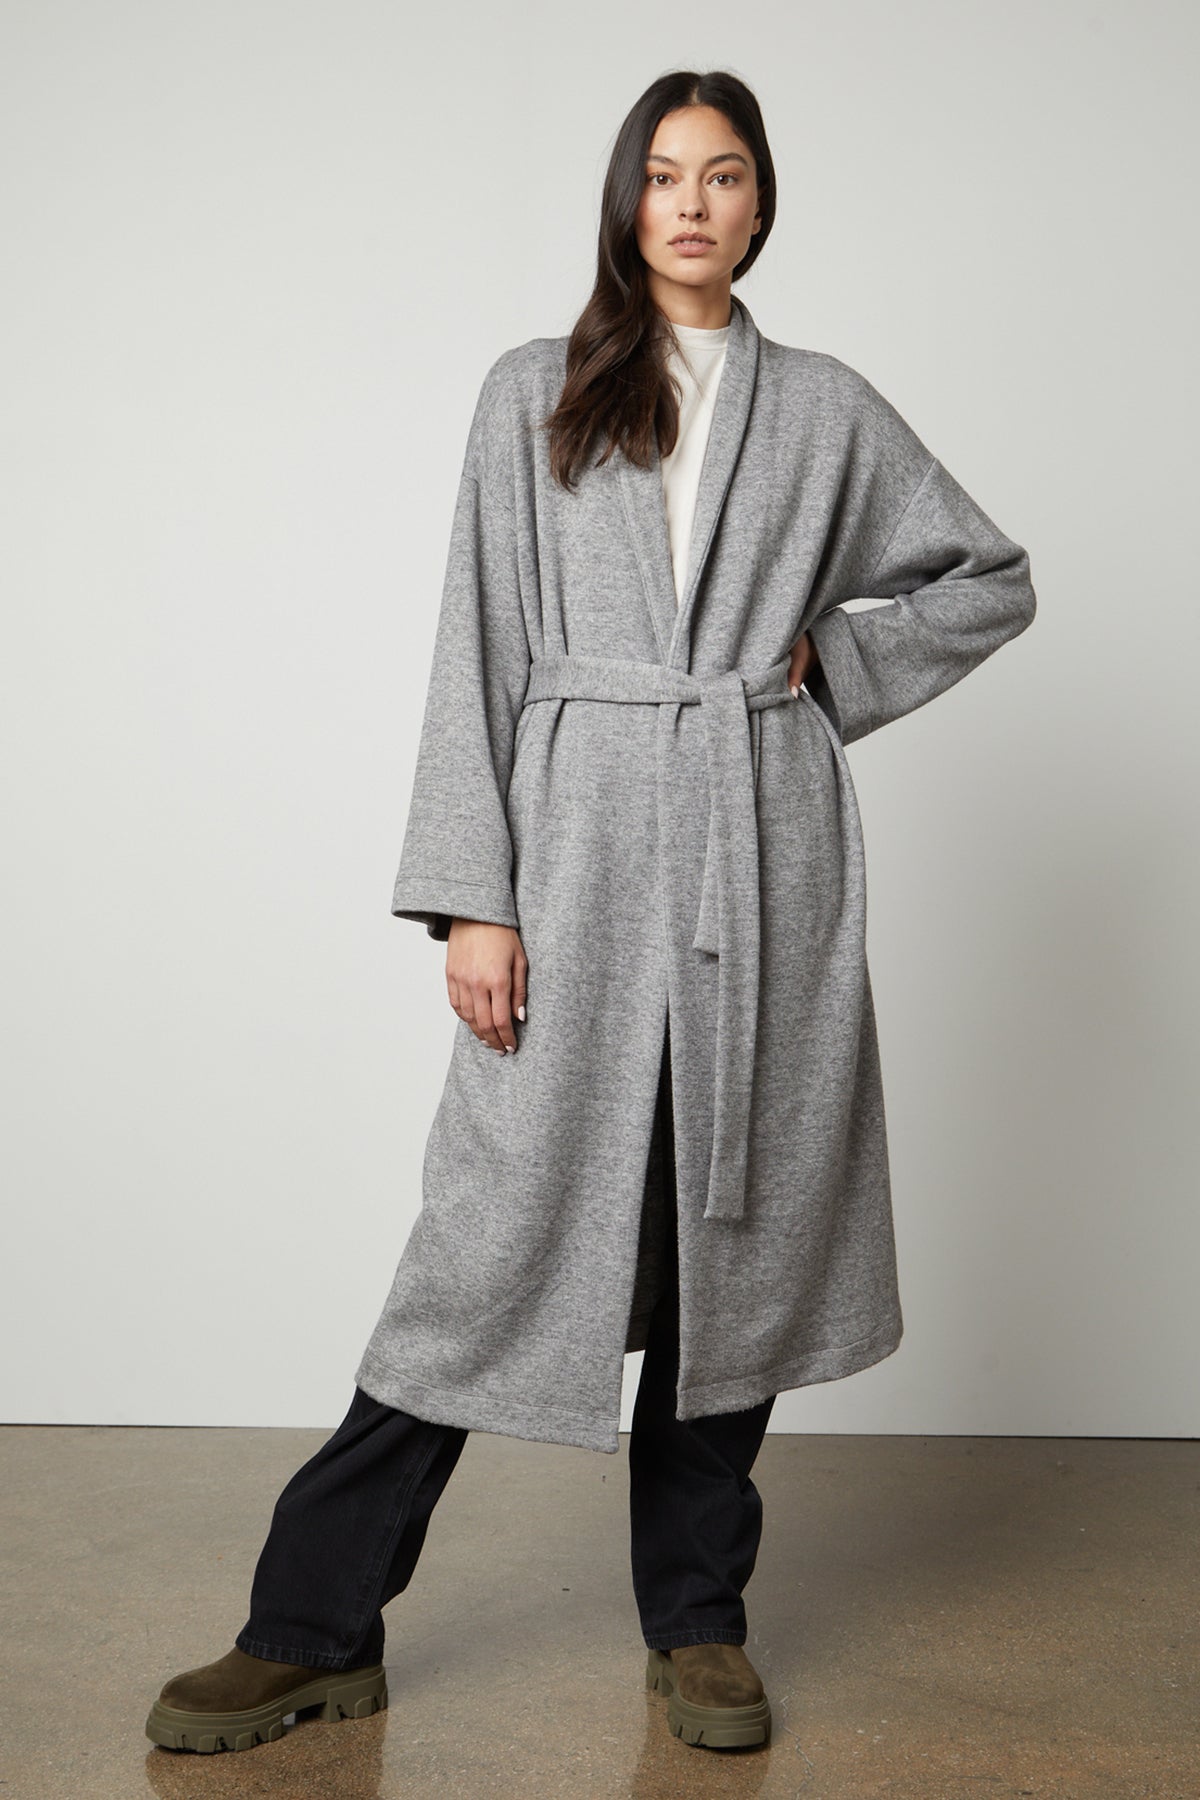 A model wearing a Velvet by Graham & Spencer Patricia Double Knit Duster Cardigan with a belt.-26910331732161